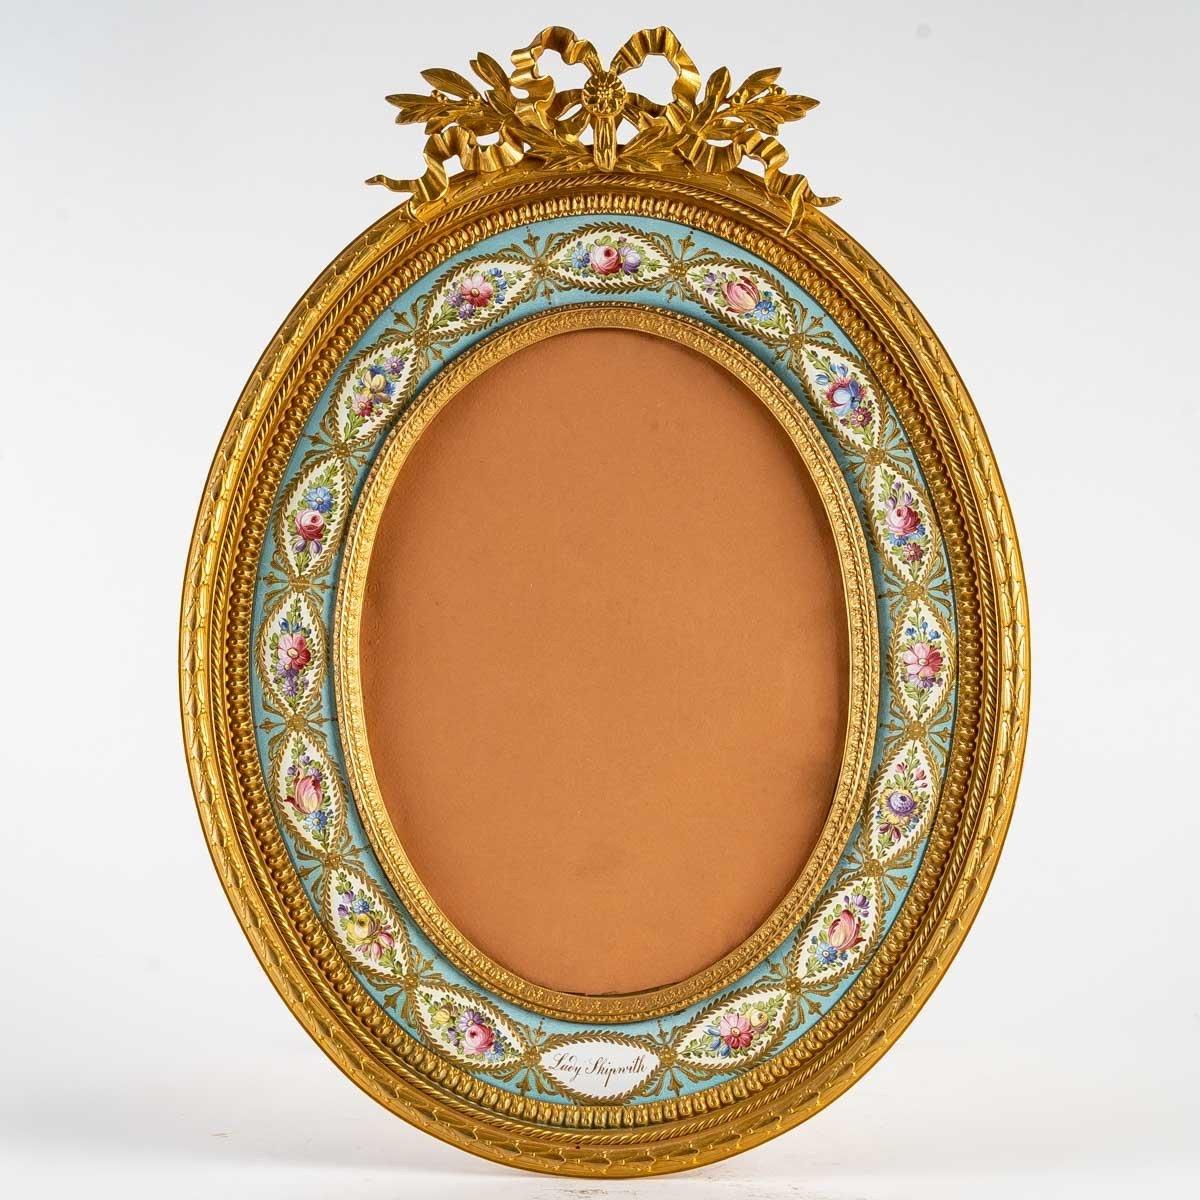 Large Bronze and Enamel Oval Photo Frame Late 19th Century
A beautiful large gilt bronze and enamel photo frame 
of oval shape
Enamel with floral decoration 
Louis XVI style, late 19th century 
in perfect condition 

ref 3228